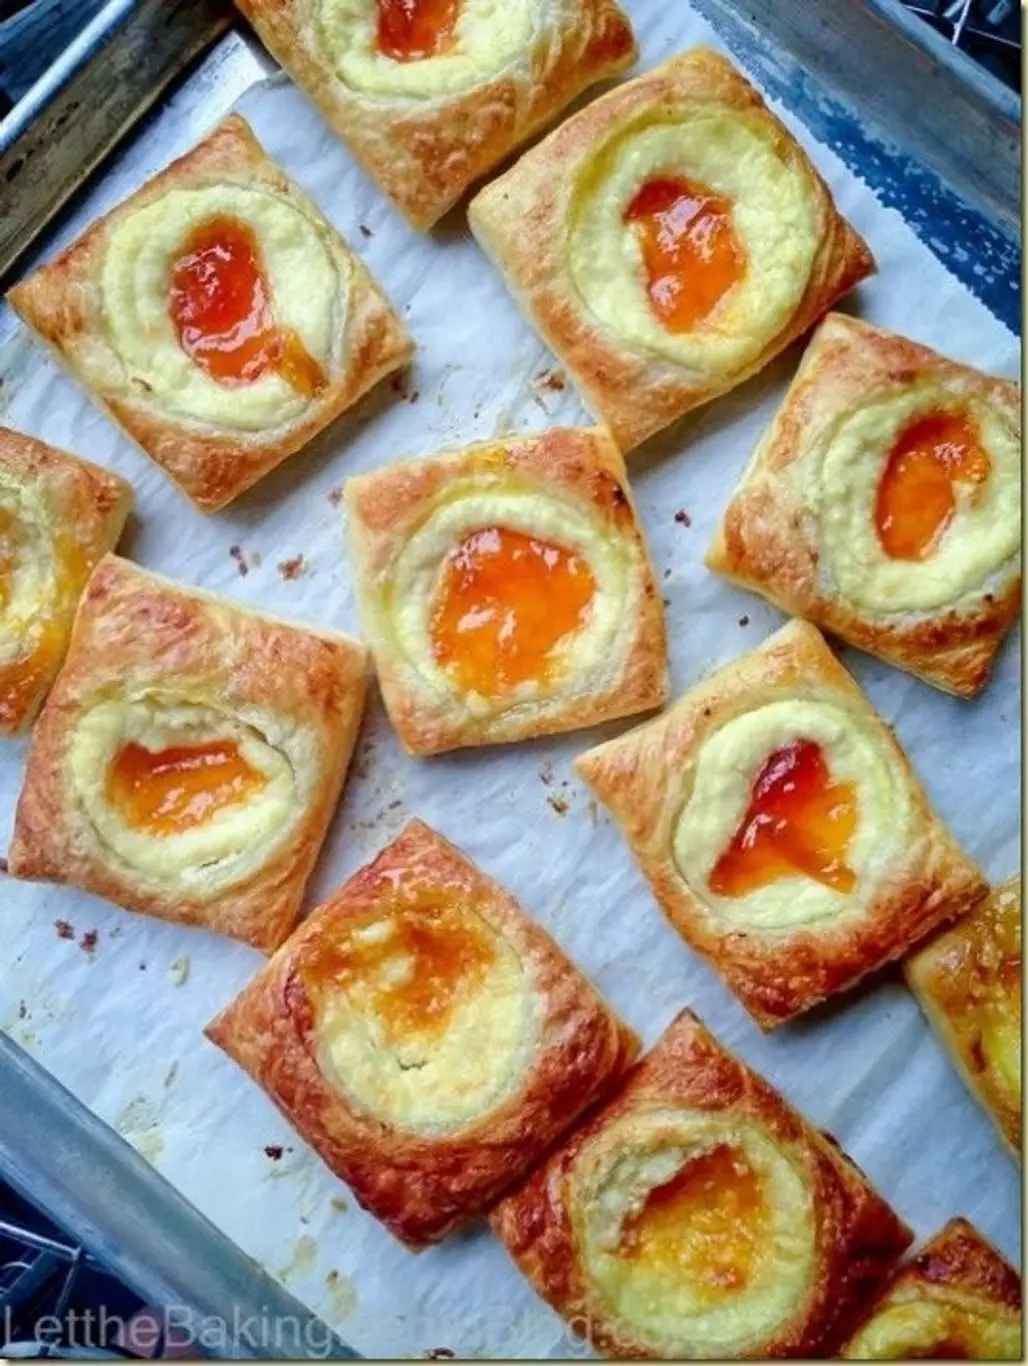 Apricot and Cheesecake Pastries